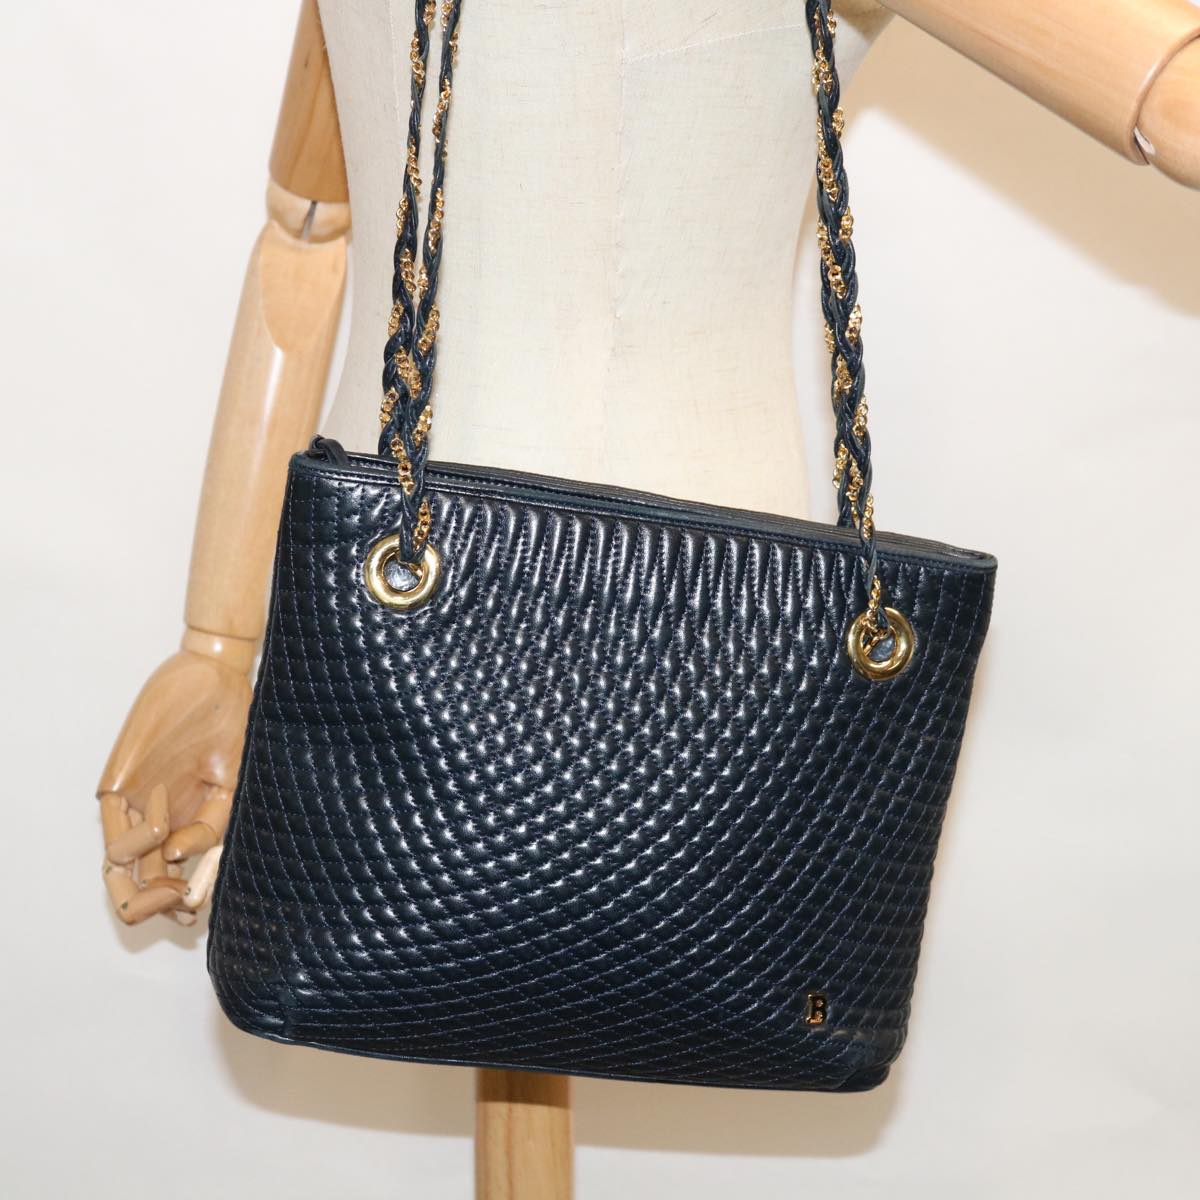 BALLY Quilted Chain Shoulder Bag Leather Black Auth am5699